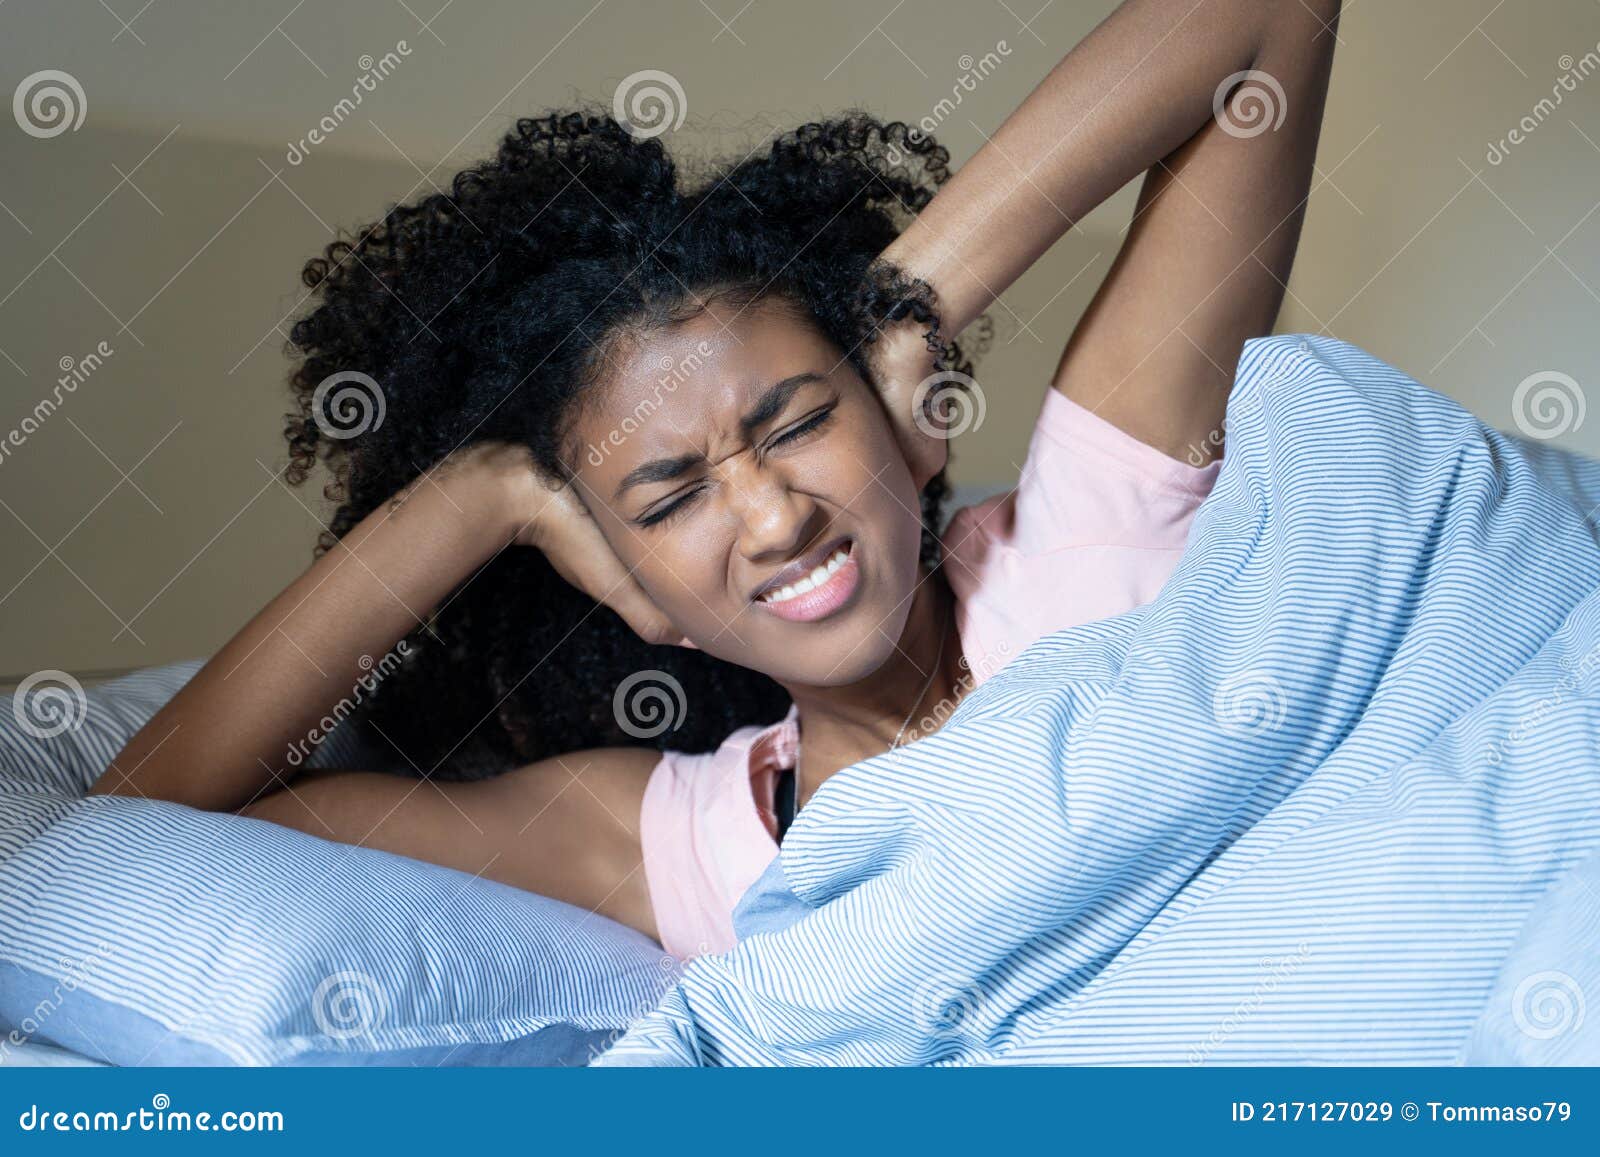 black woman suffering insomnia because of noisy neighbour